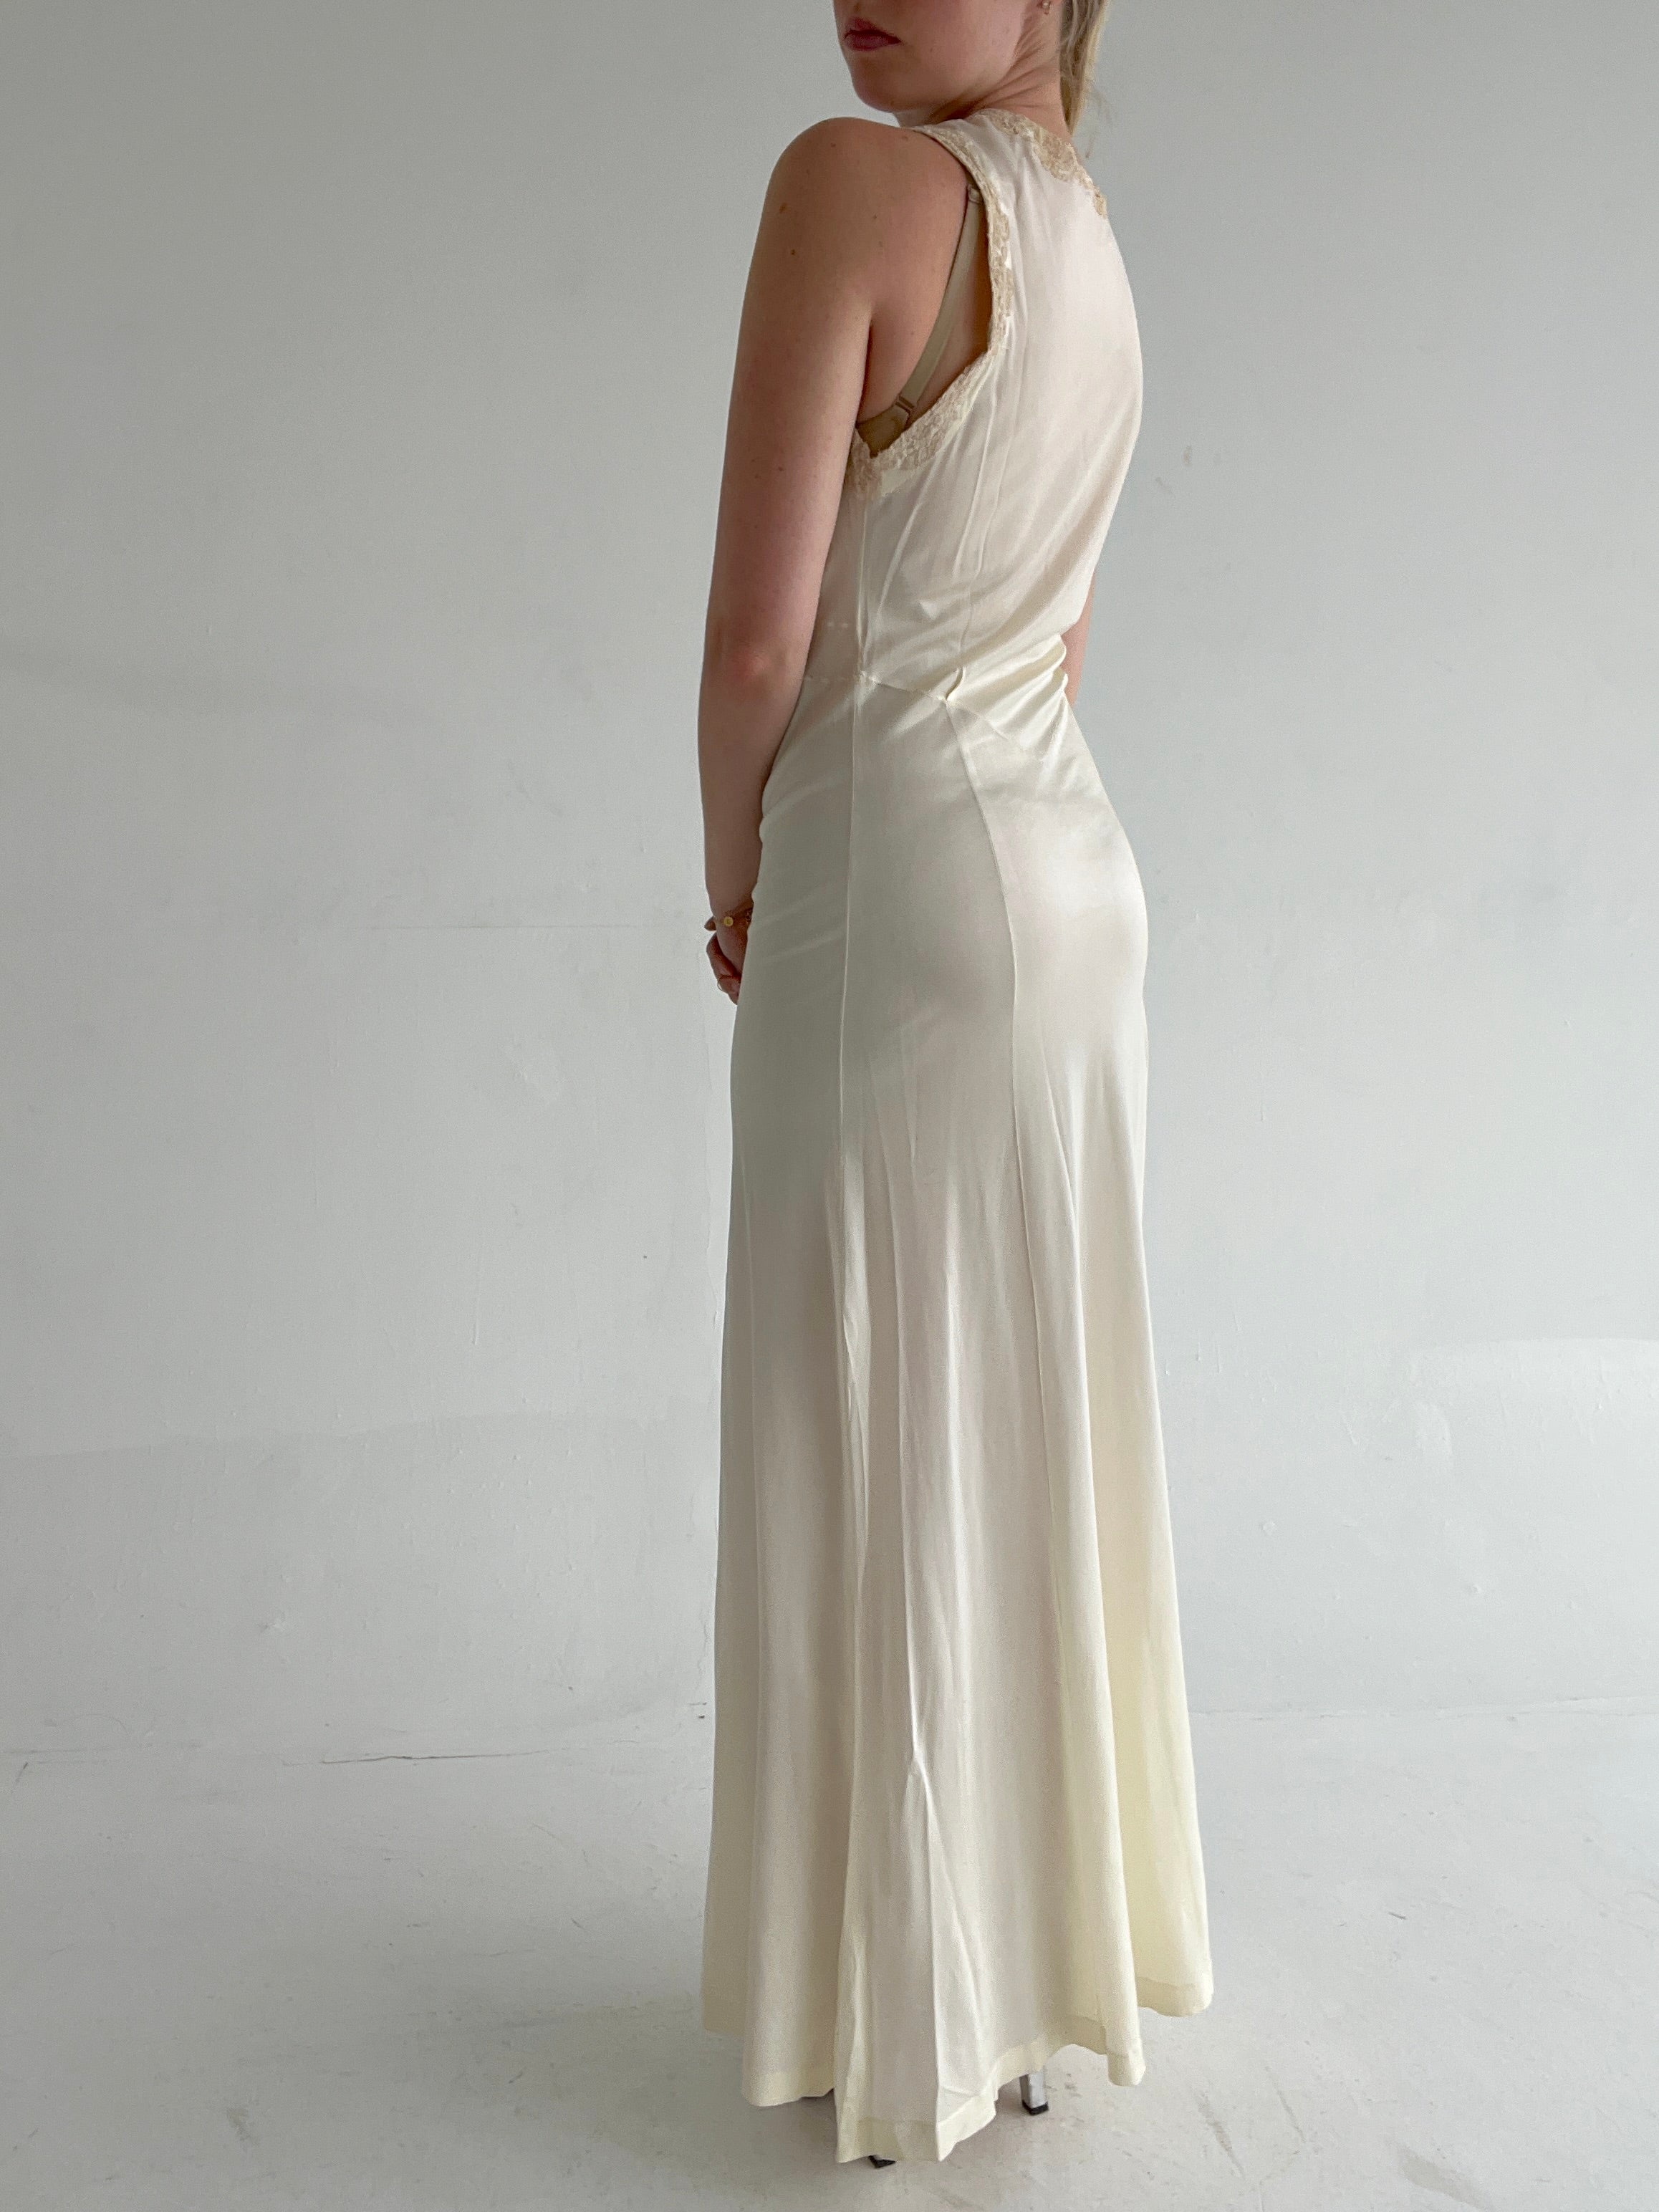 1950's Off White Slip Dress with Cream Lace